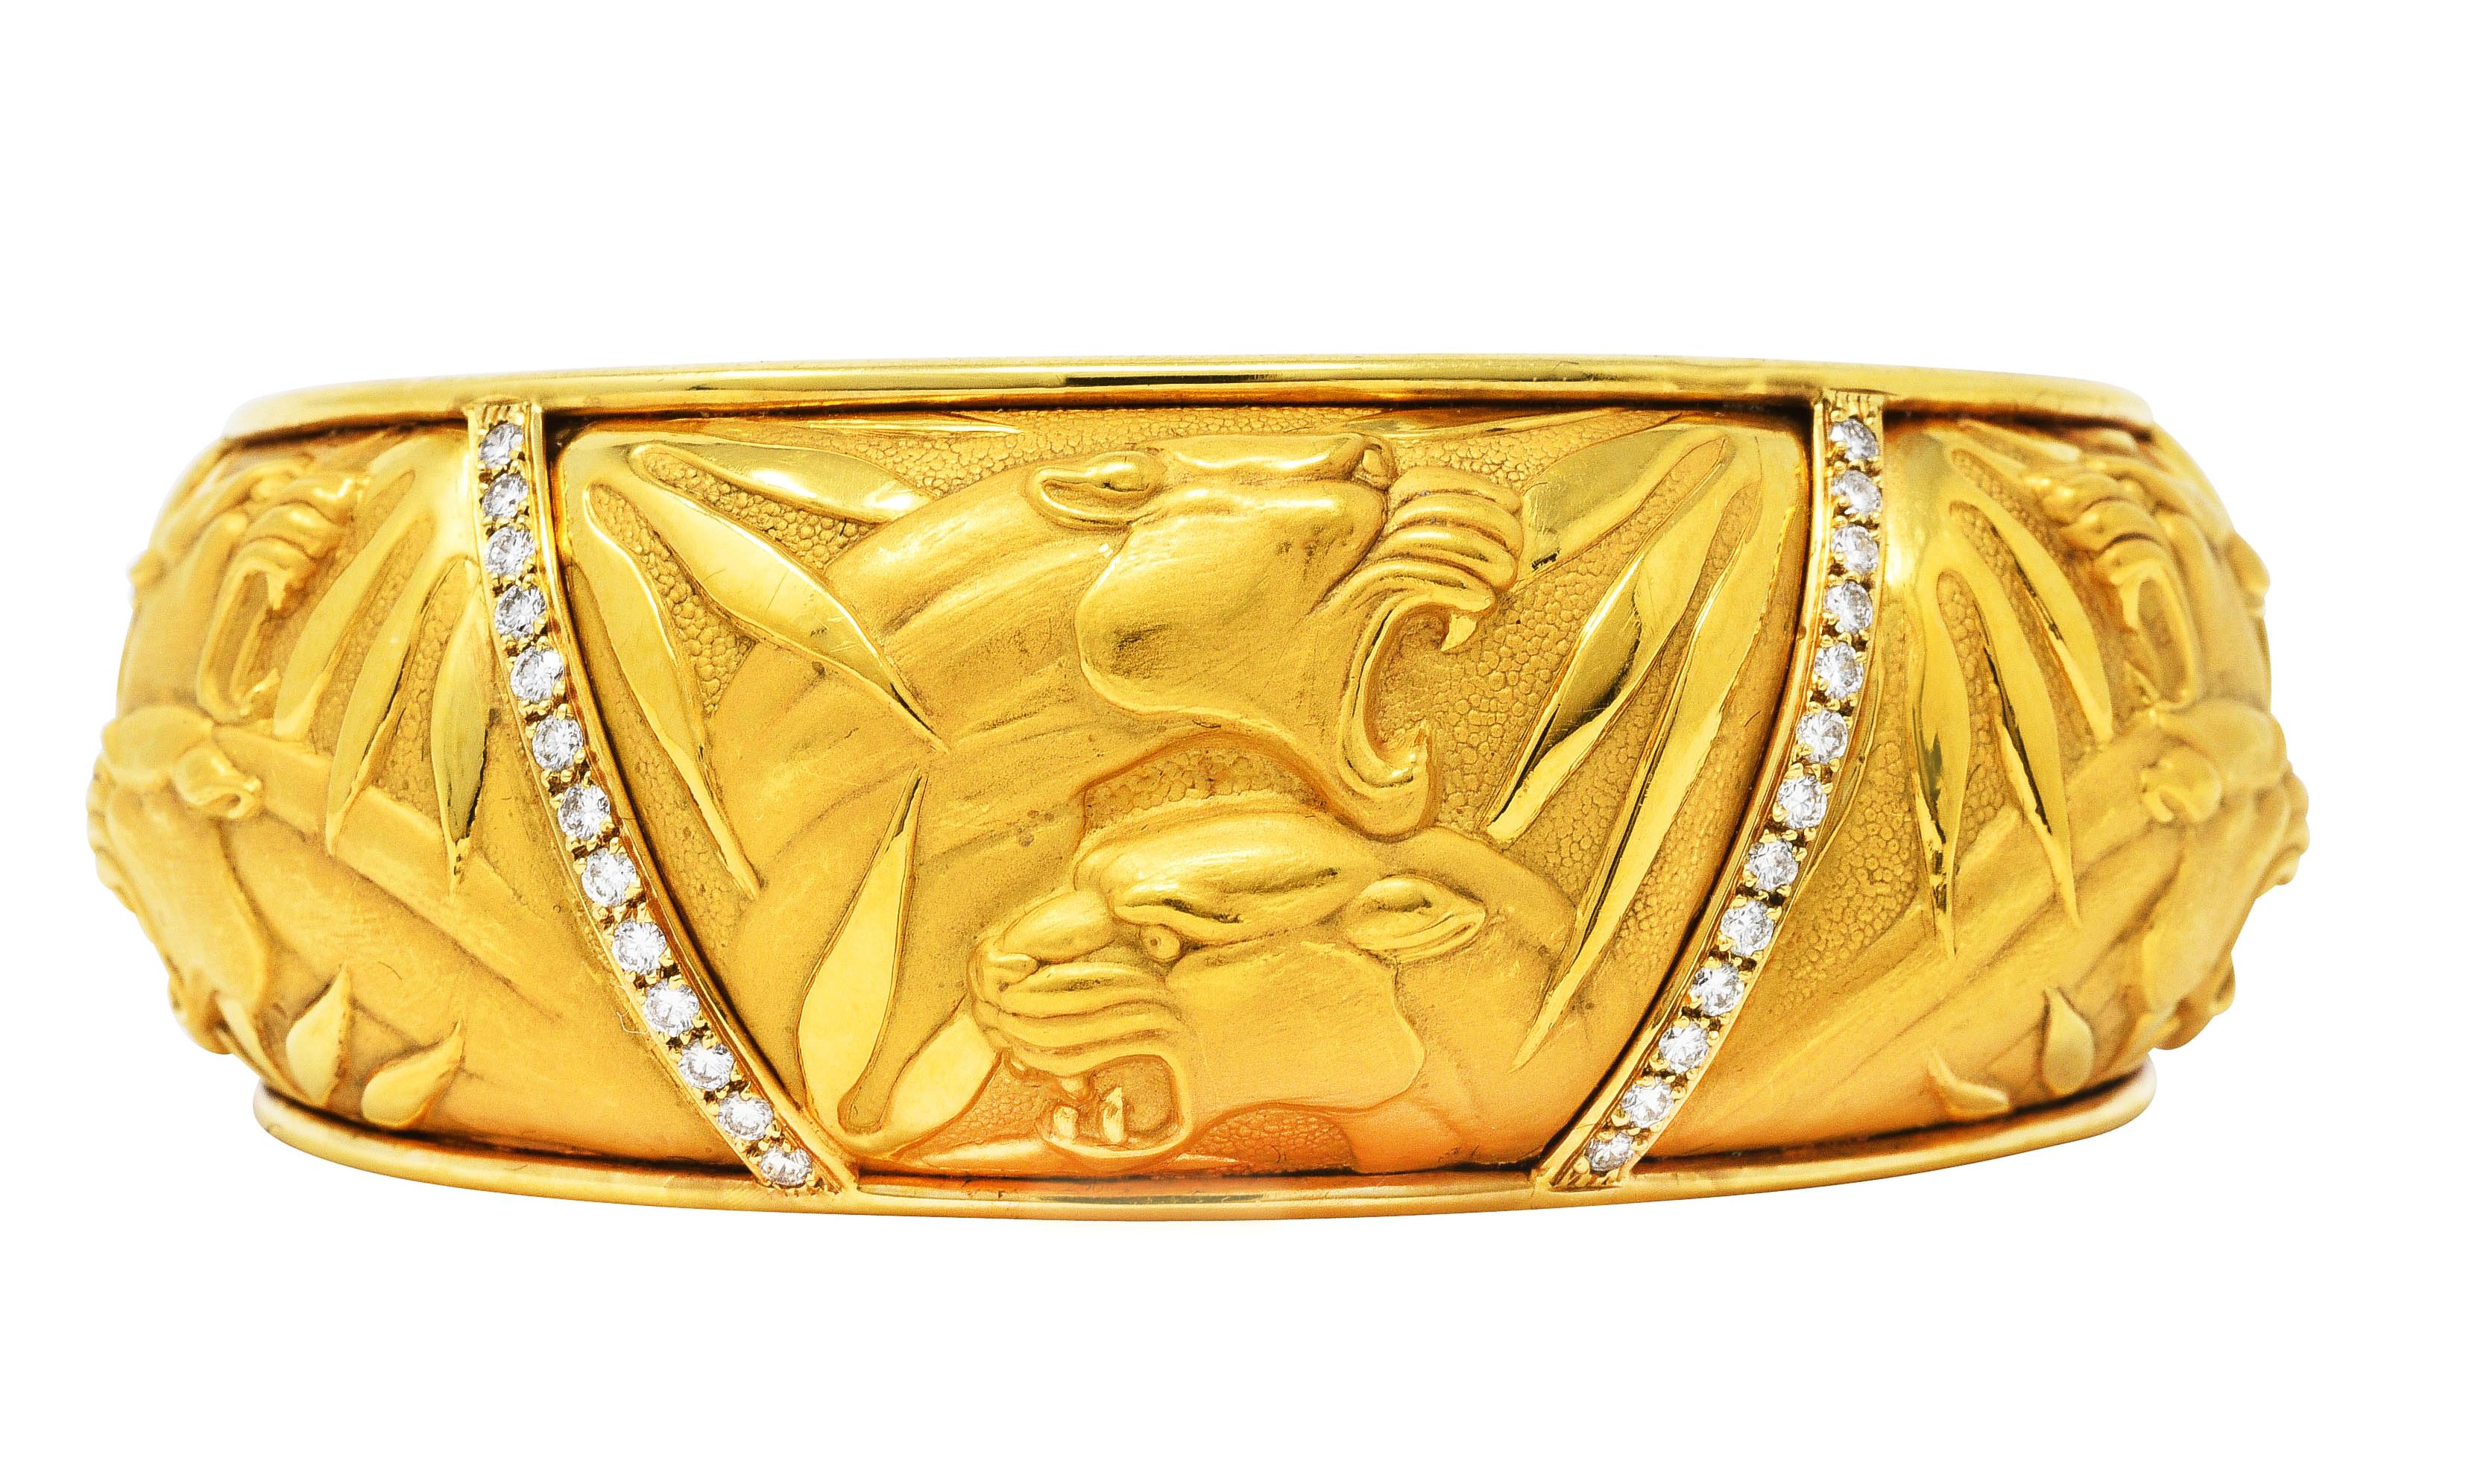 Cuff bracelet featuring five repoussè panels depicting highly rendered matte gold panthers

With high polished frame surround with two rows of pavè round brilliant cut diamonds

Weighing approximately 0.65 carat total - G/H in color with VS